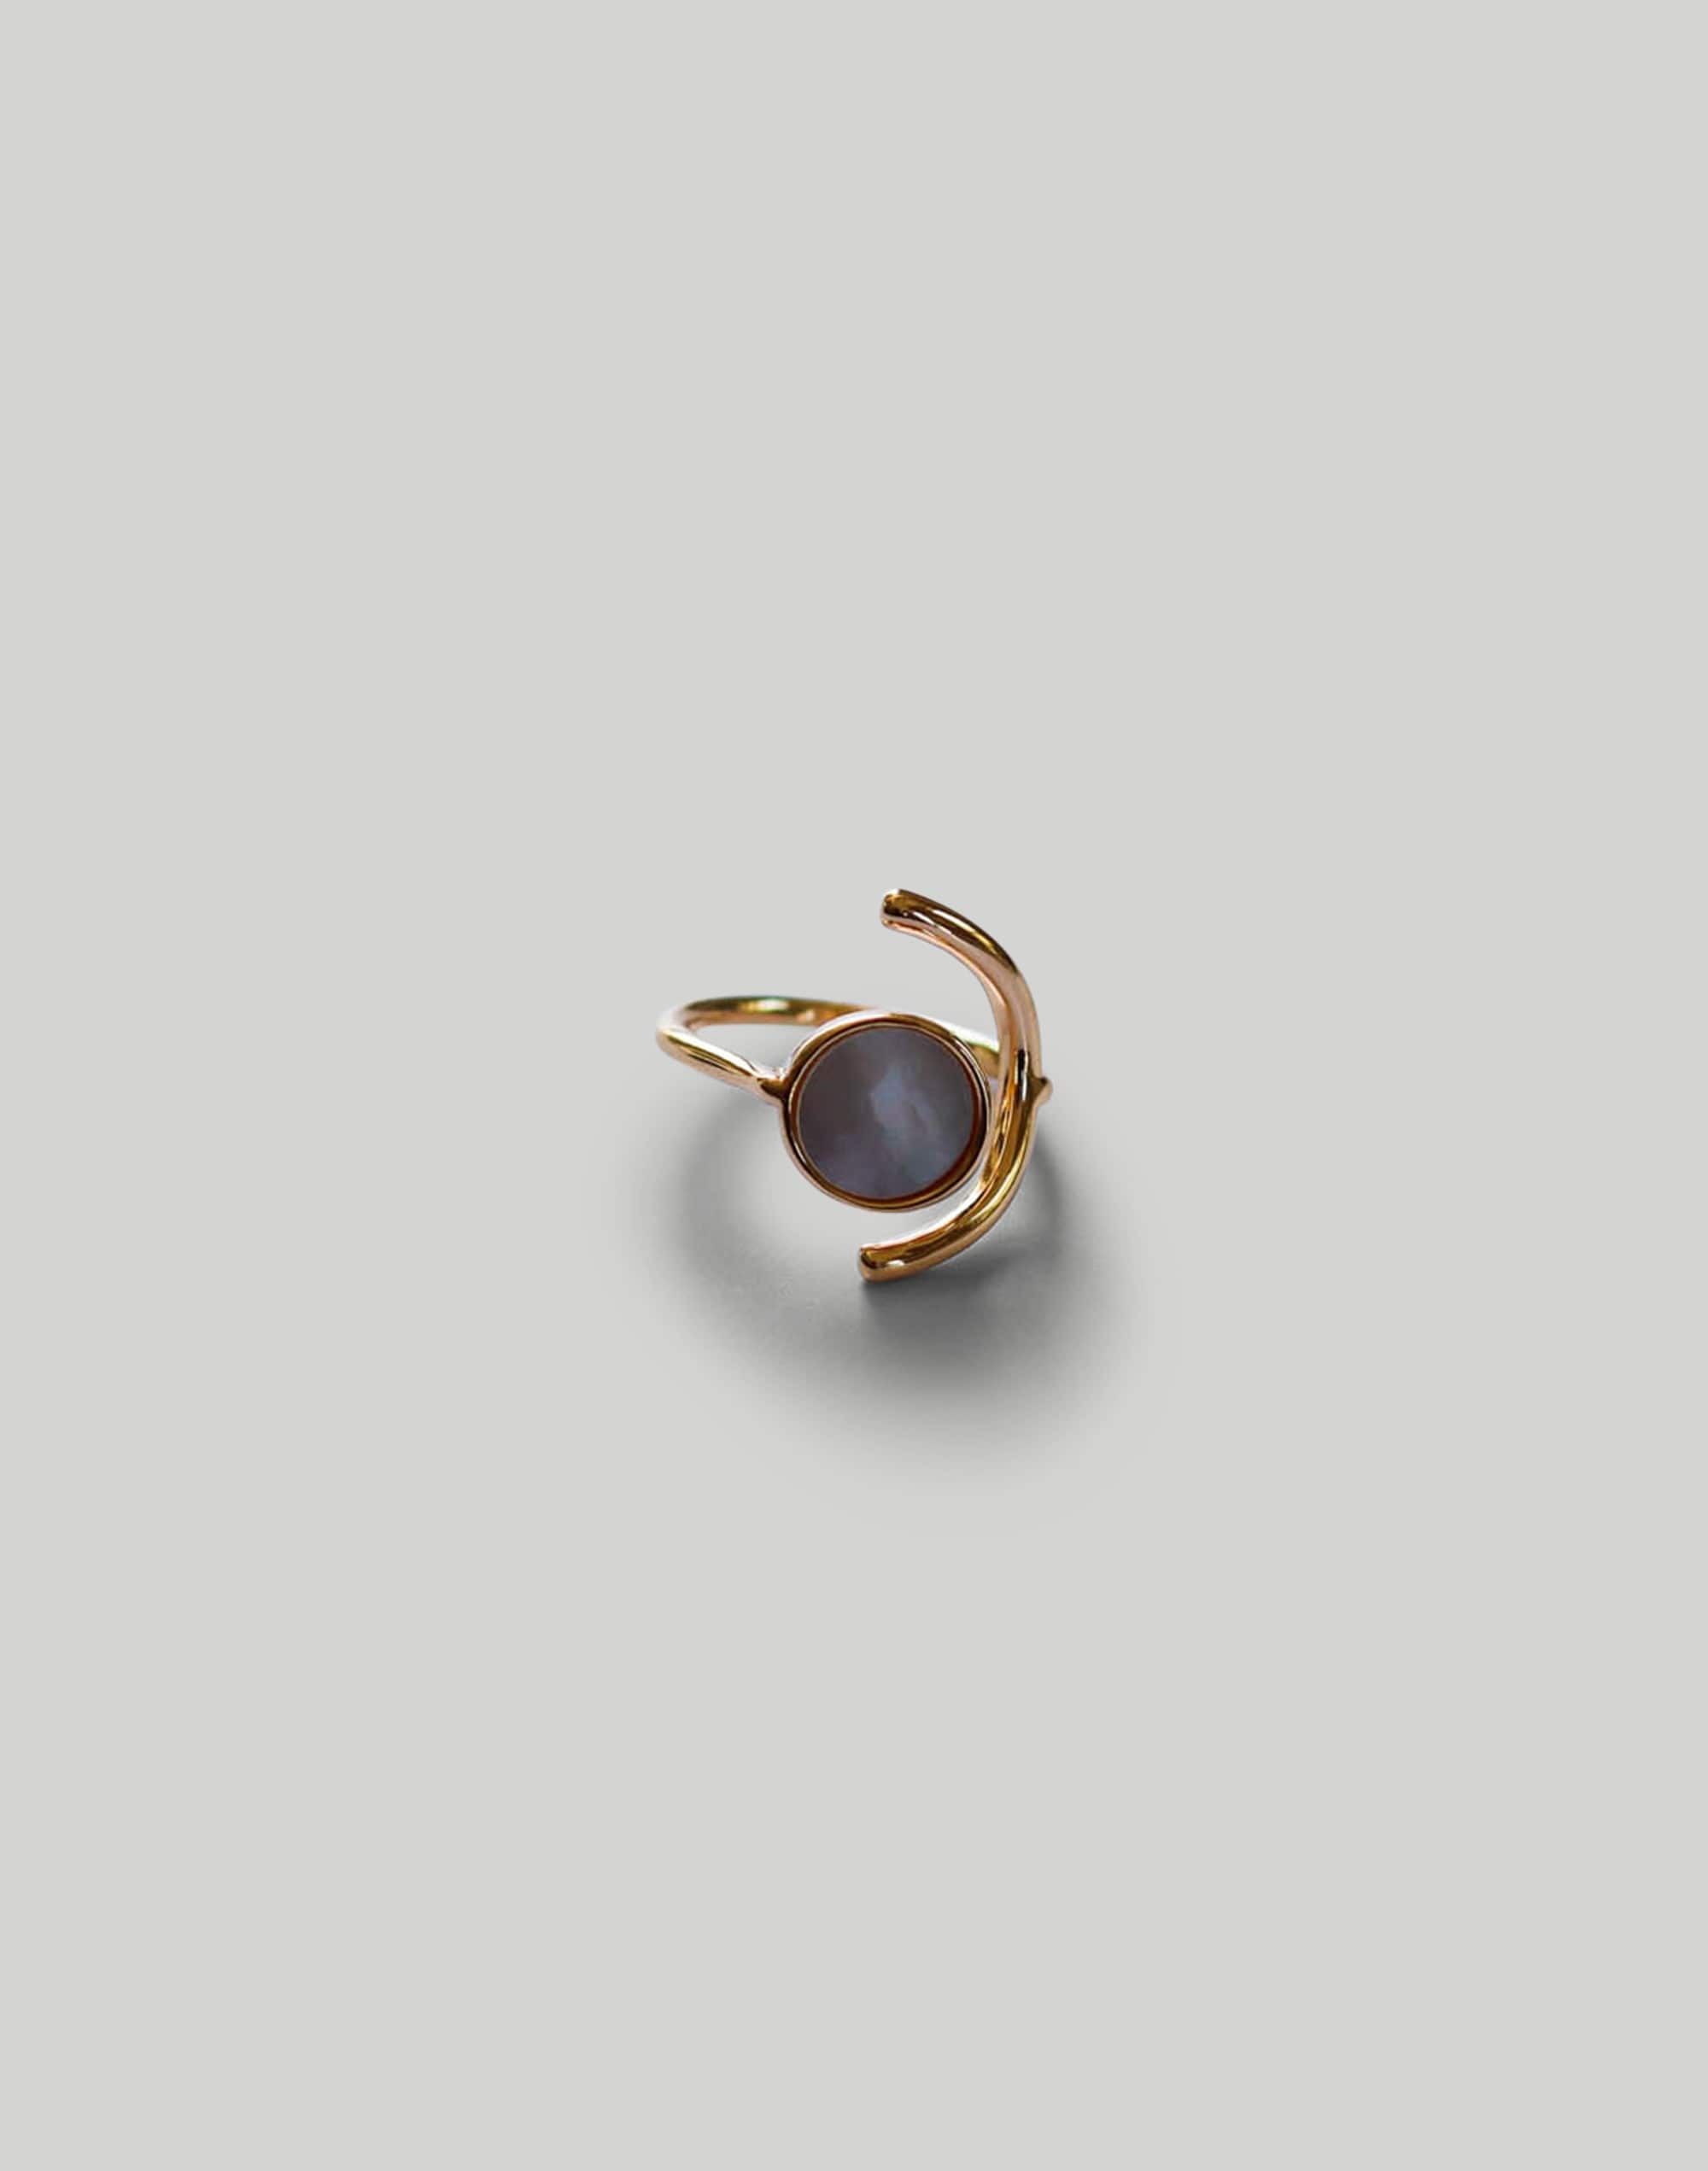 Abcrete & Co. Geo Crescent Pearl Adjustable Ring